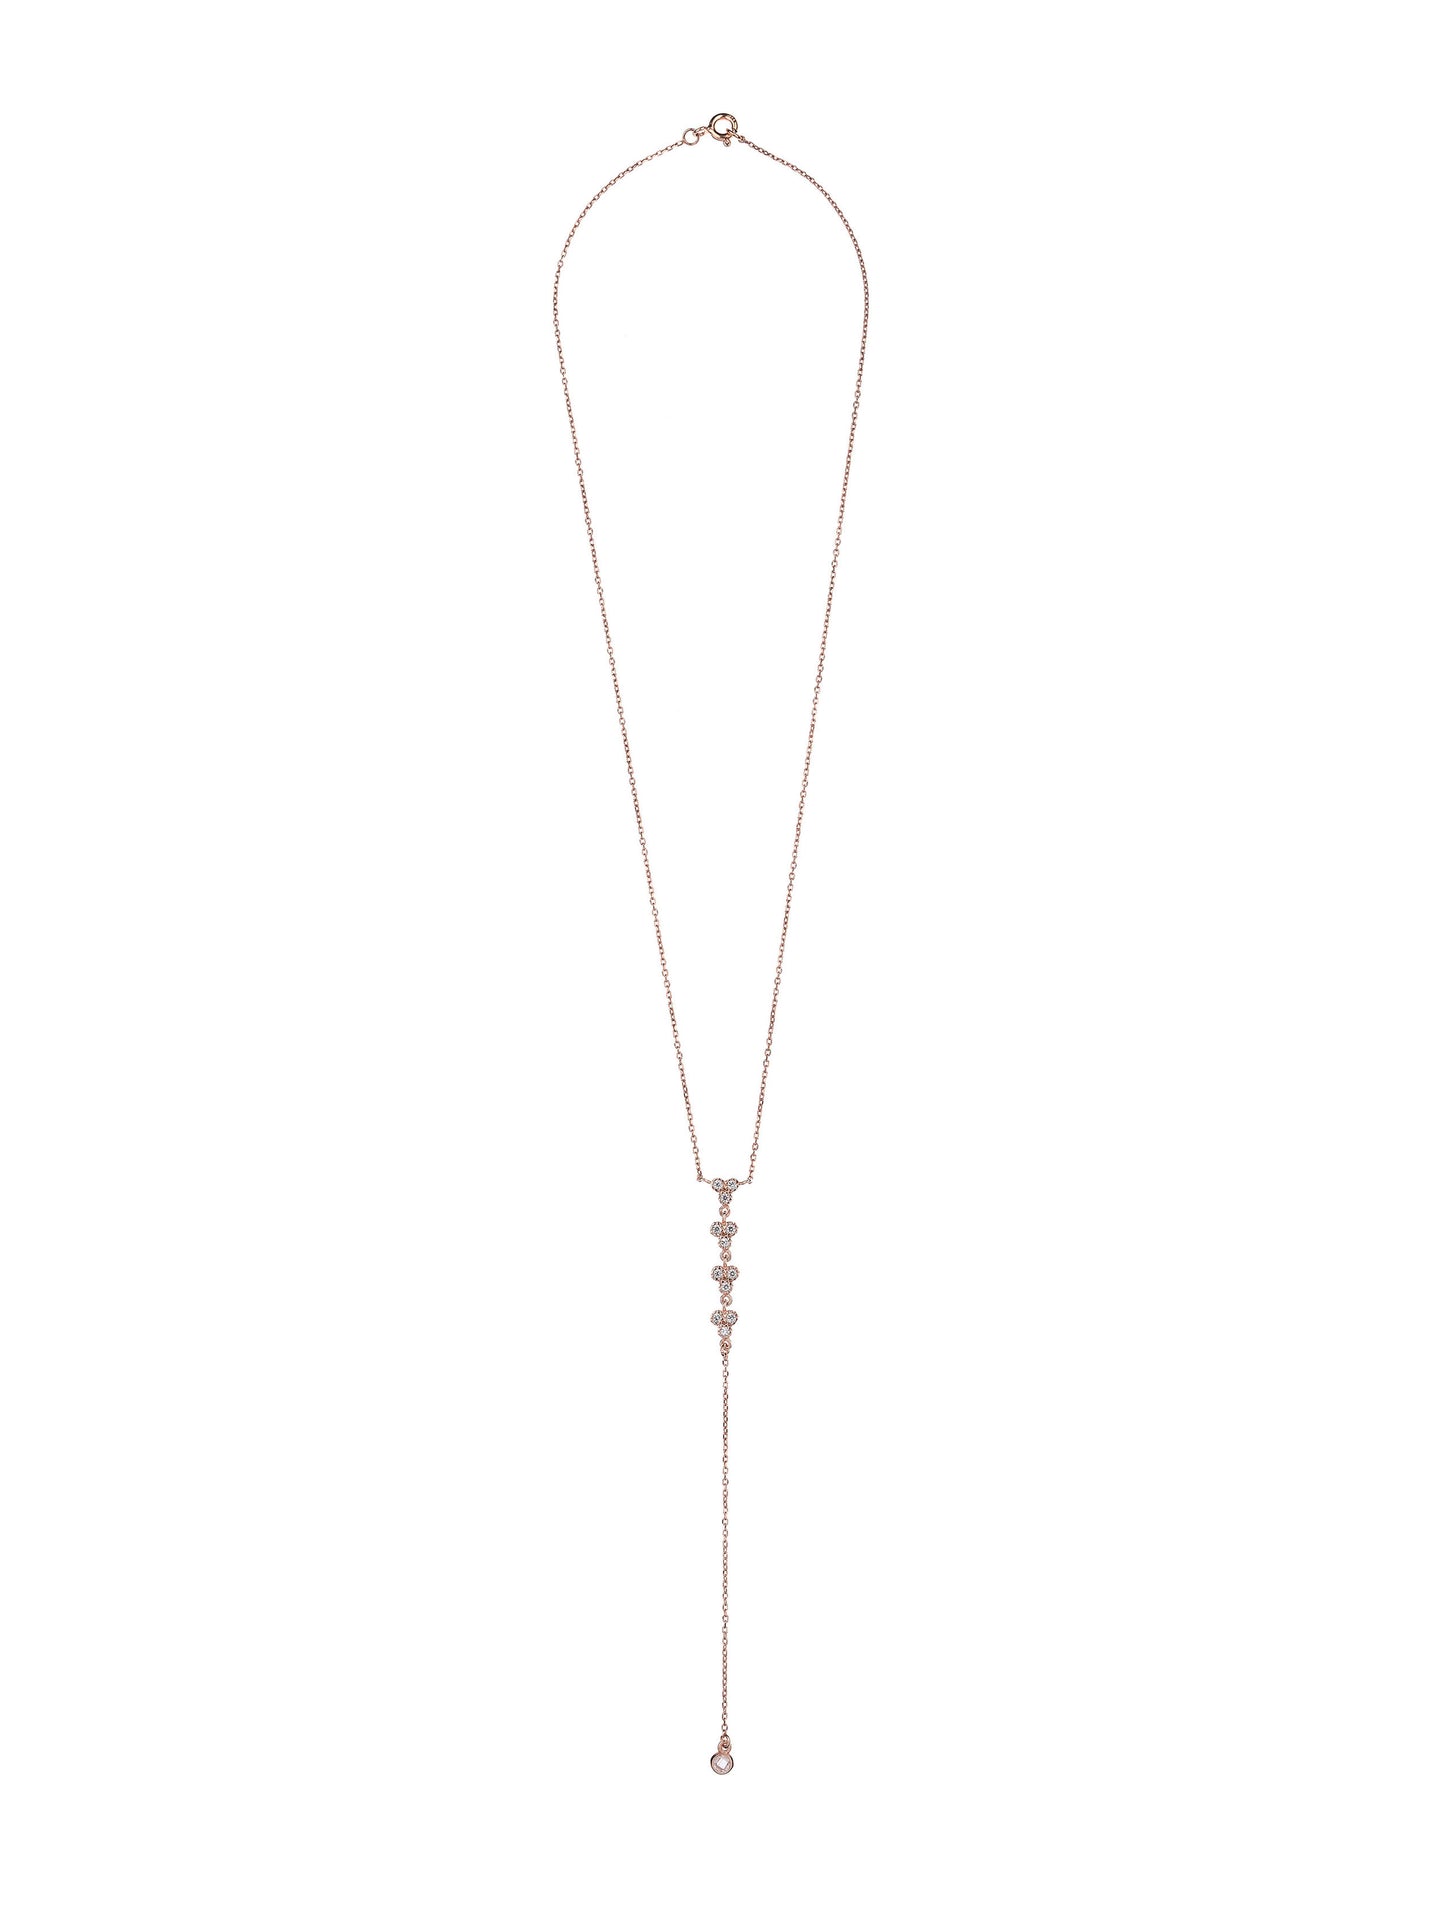 Dew Drops Lariat - Pink gold plated